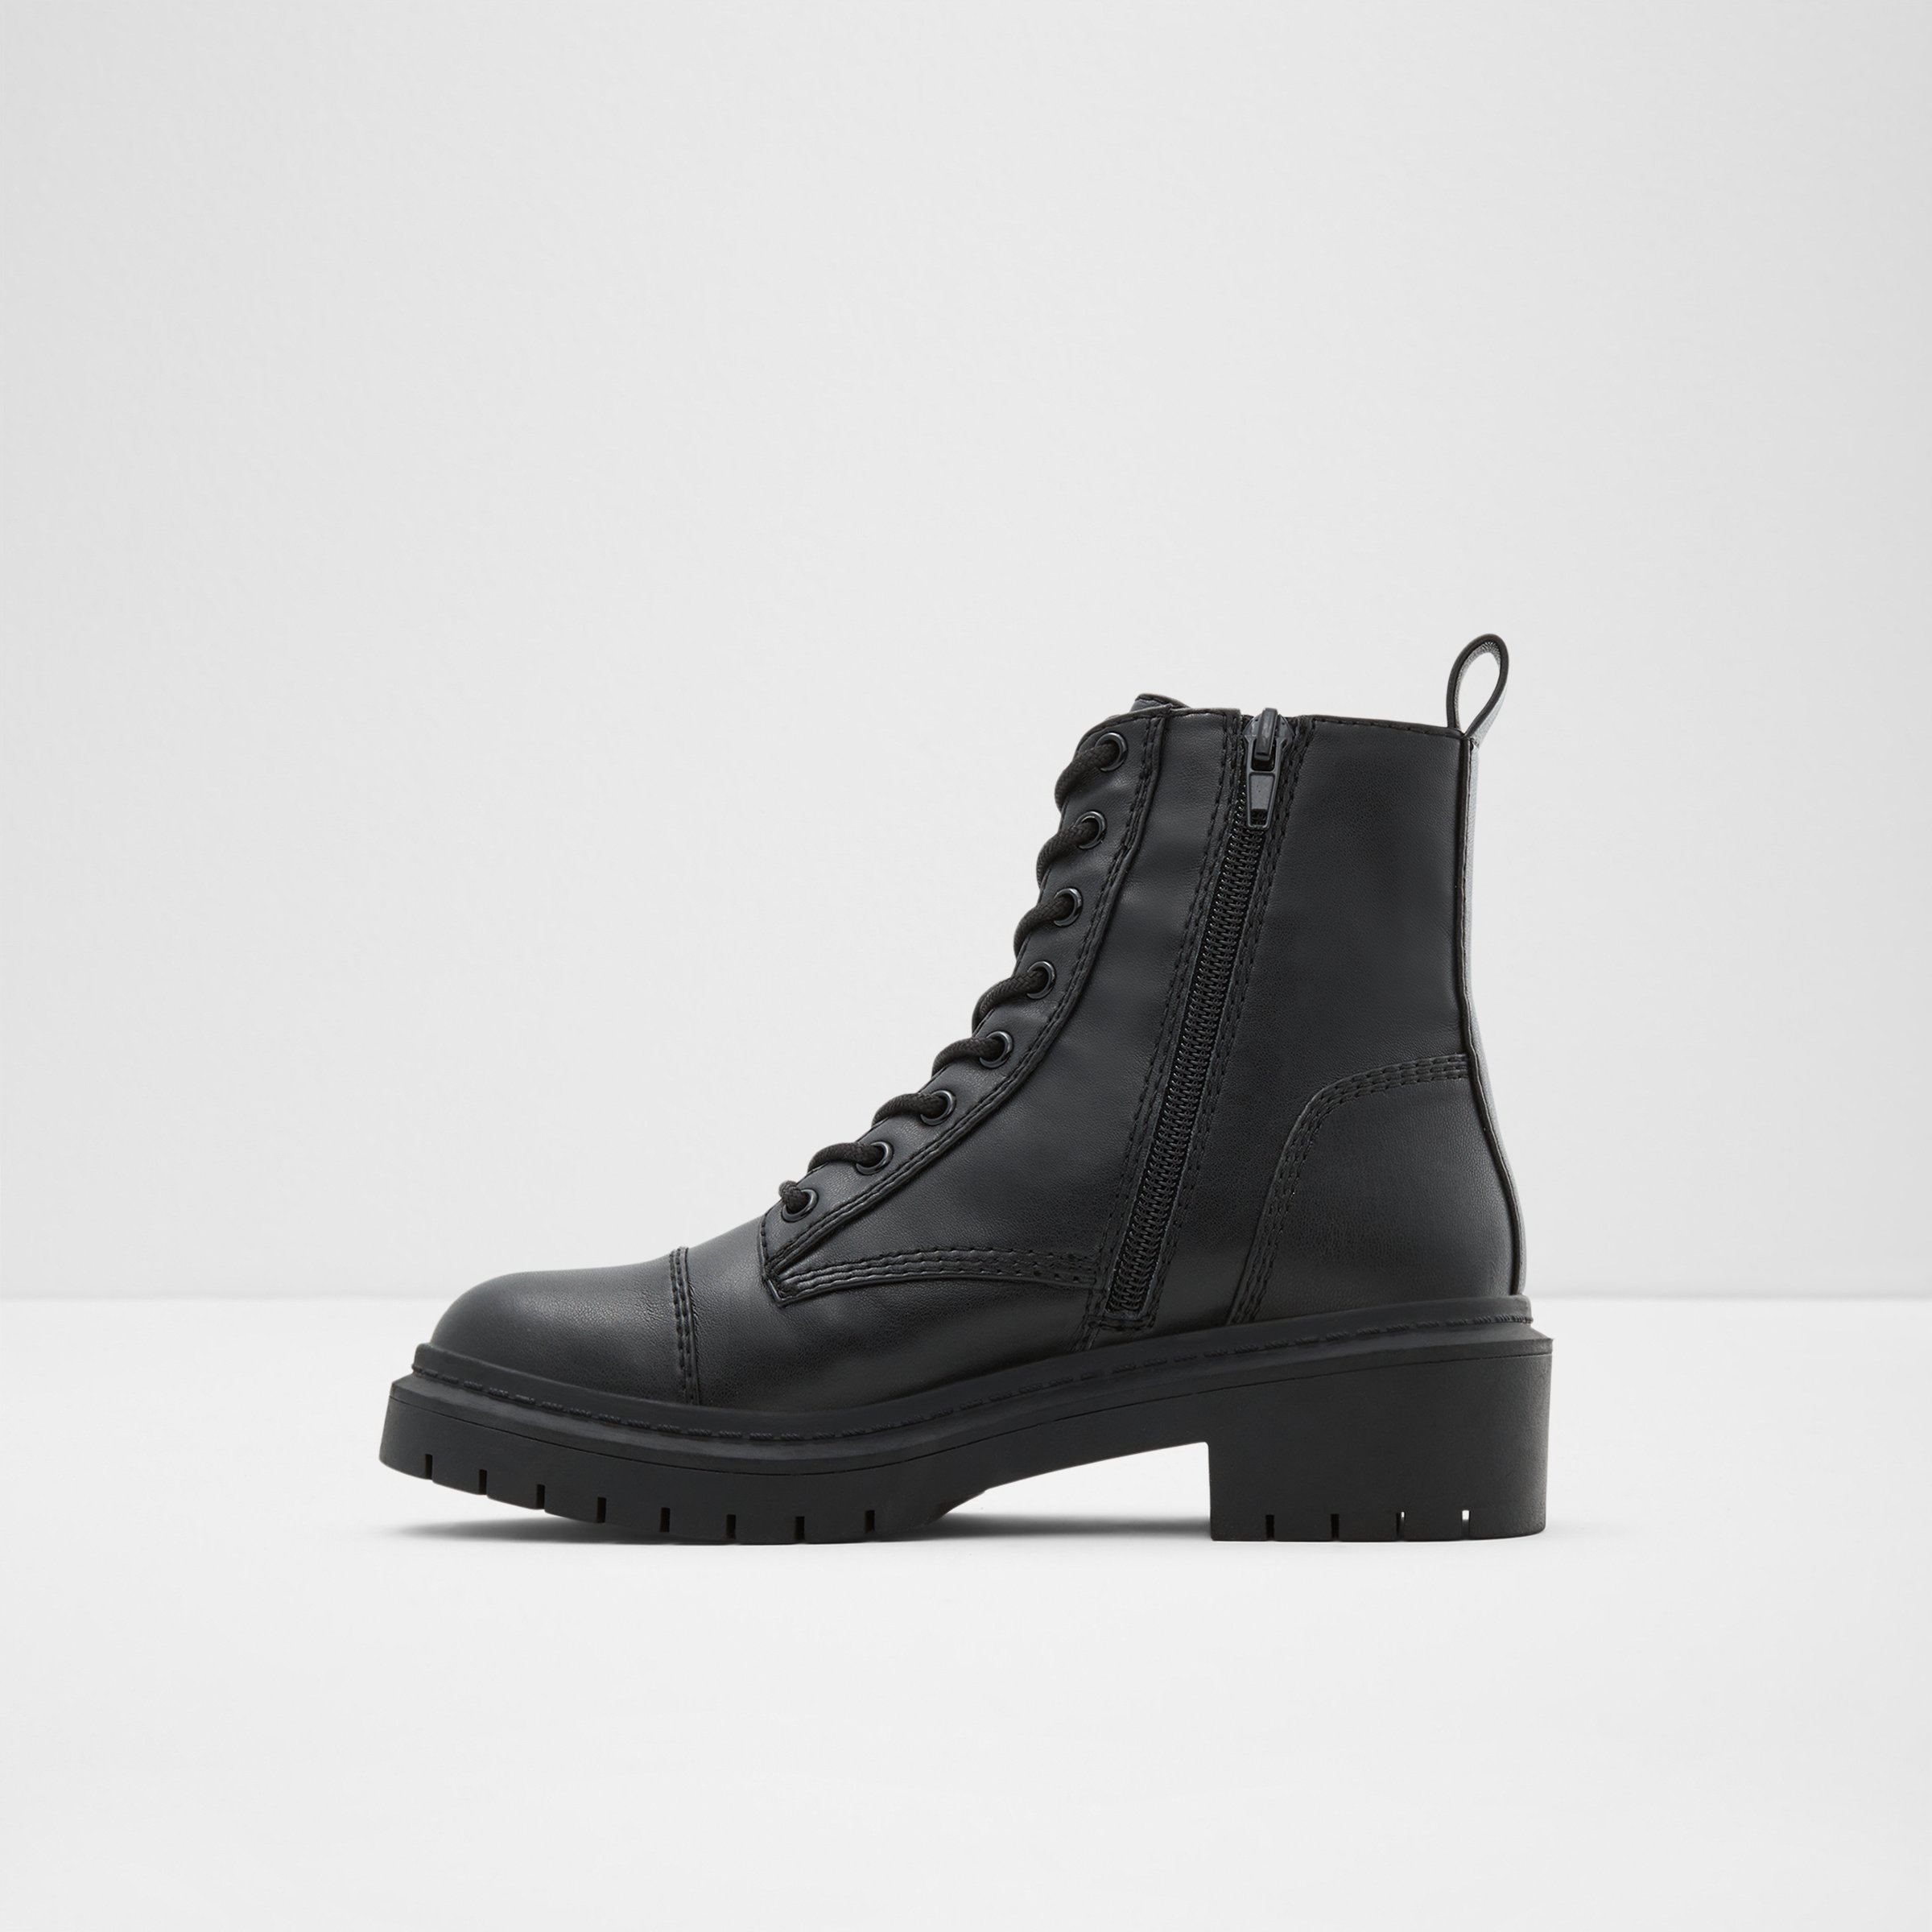 Goer Black Synthetic Smooth Women's Casual boots | ALDO US